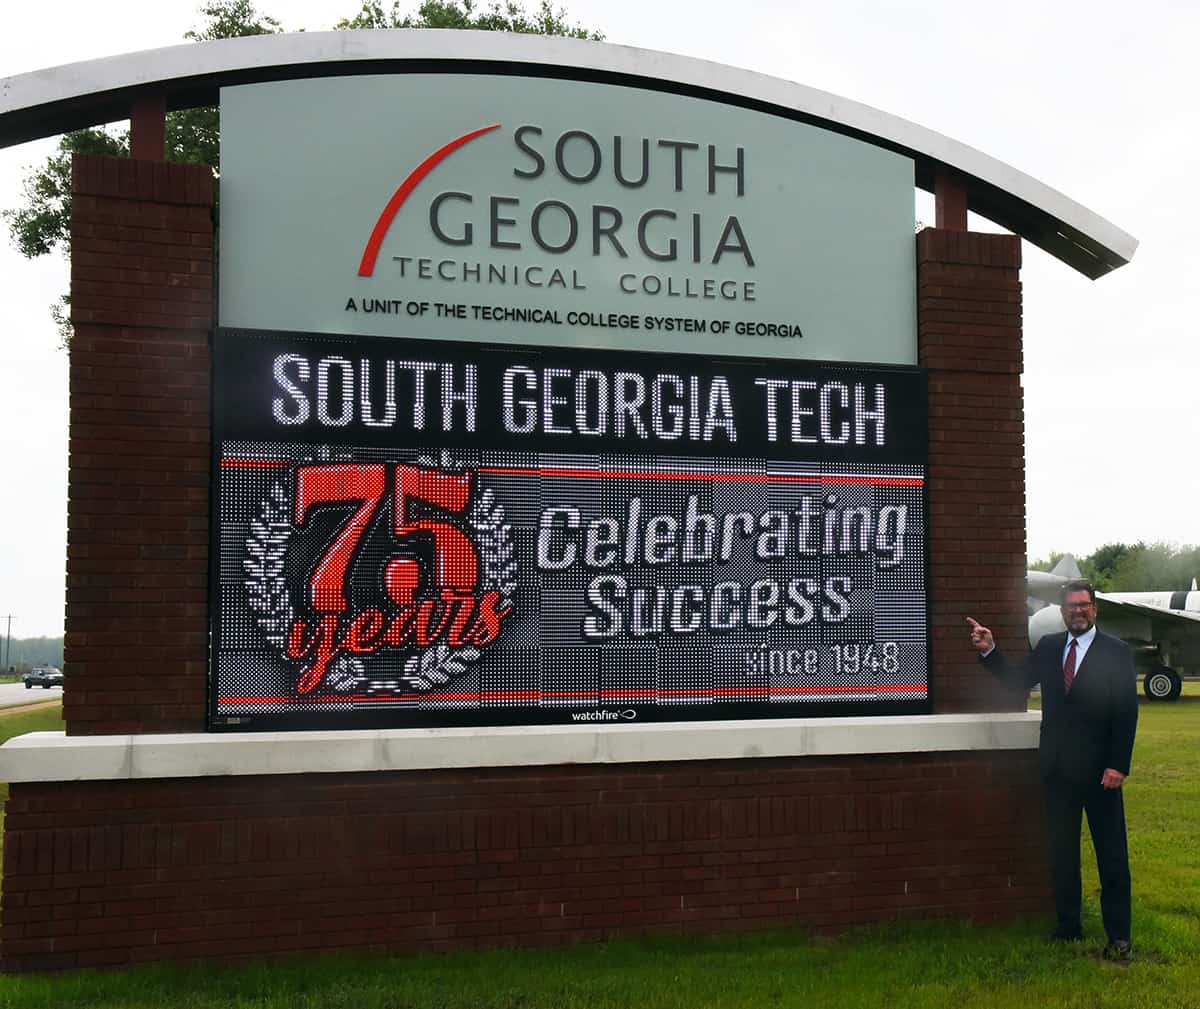 South Georgia Technical College President Dr. John Watford is shown above encouraging individuals to reconnect with the college as part of SGTC’s 75th anniversary celebration of successes.